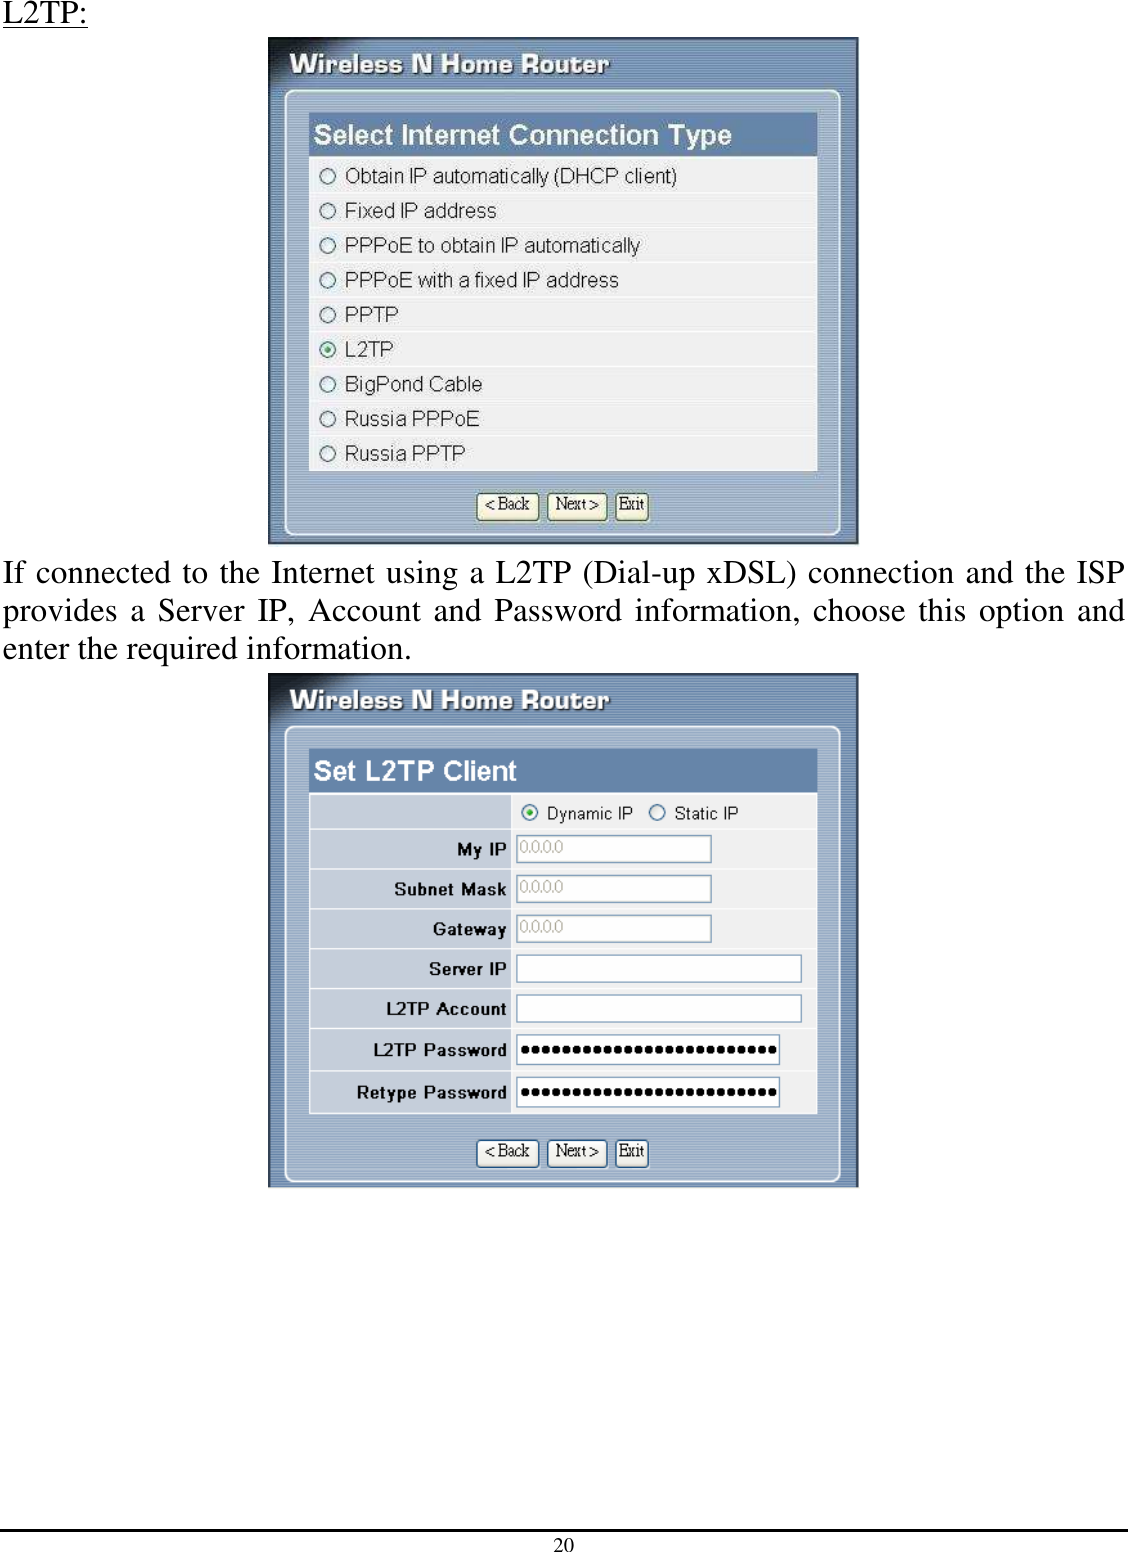 20 L2TP:  If connected to the Internet using a L2TP (Dial-up xDSL) connection and the ISP provides a Server IP, Account and Password information, choose this option and enter the required information.  